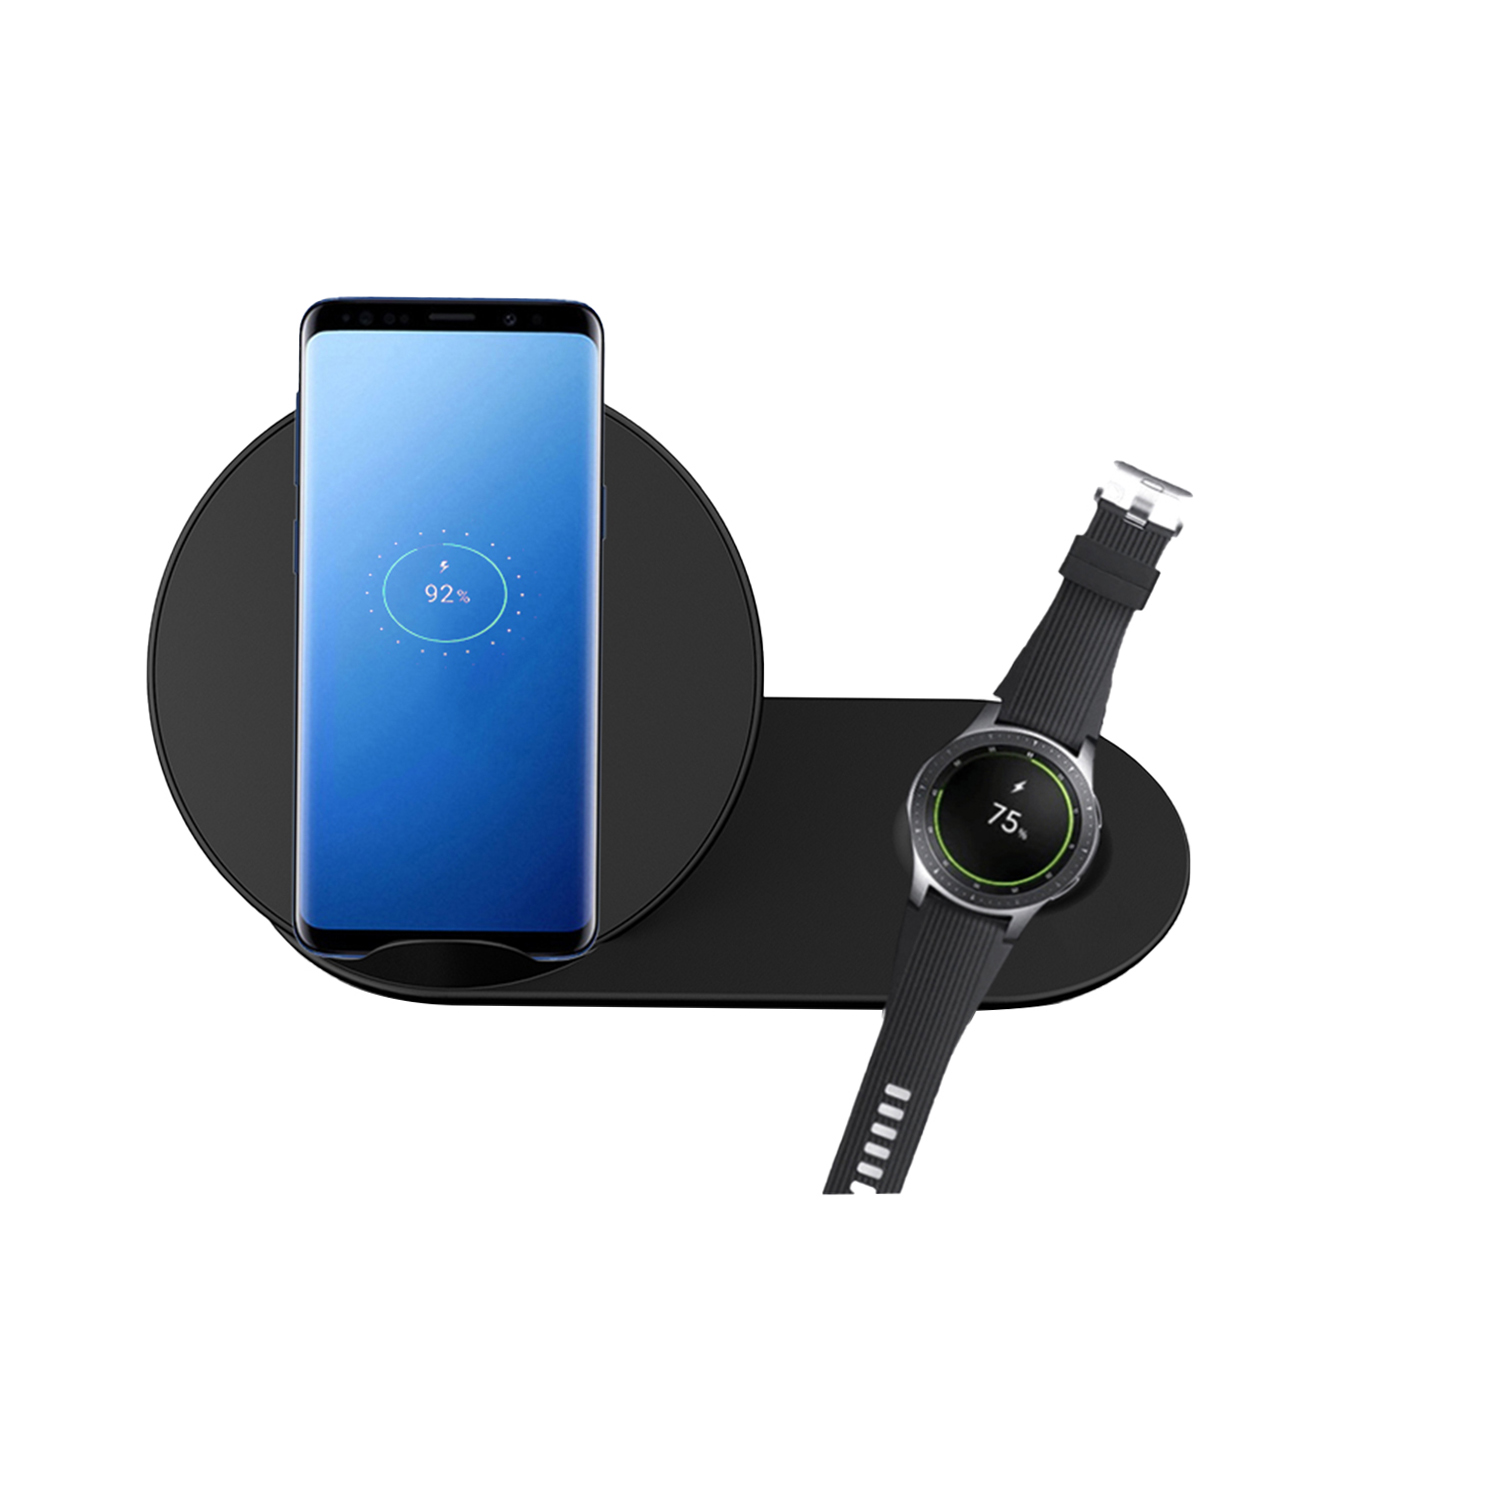 Shenzhen New Design 2 in 1 Wireless Charging Pad για iPhone XS Max / XS / XR / X / 8 Plus και Samsung Galaxy S9 / S8 και Συμβατό με Samsung Watches (MH-Q440B)